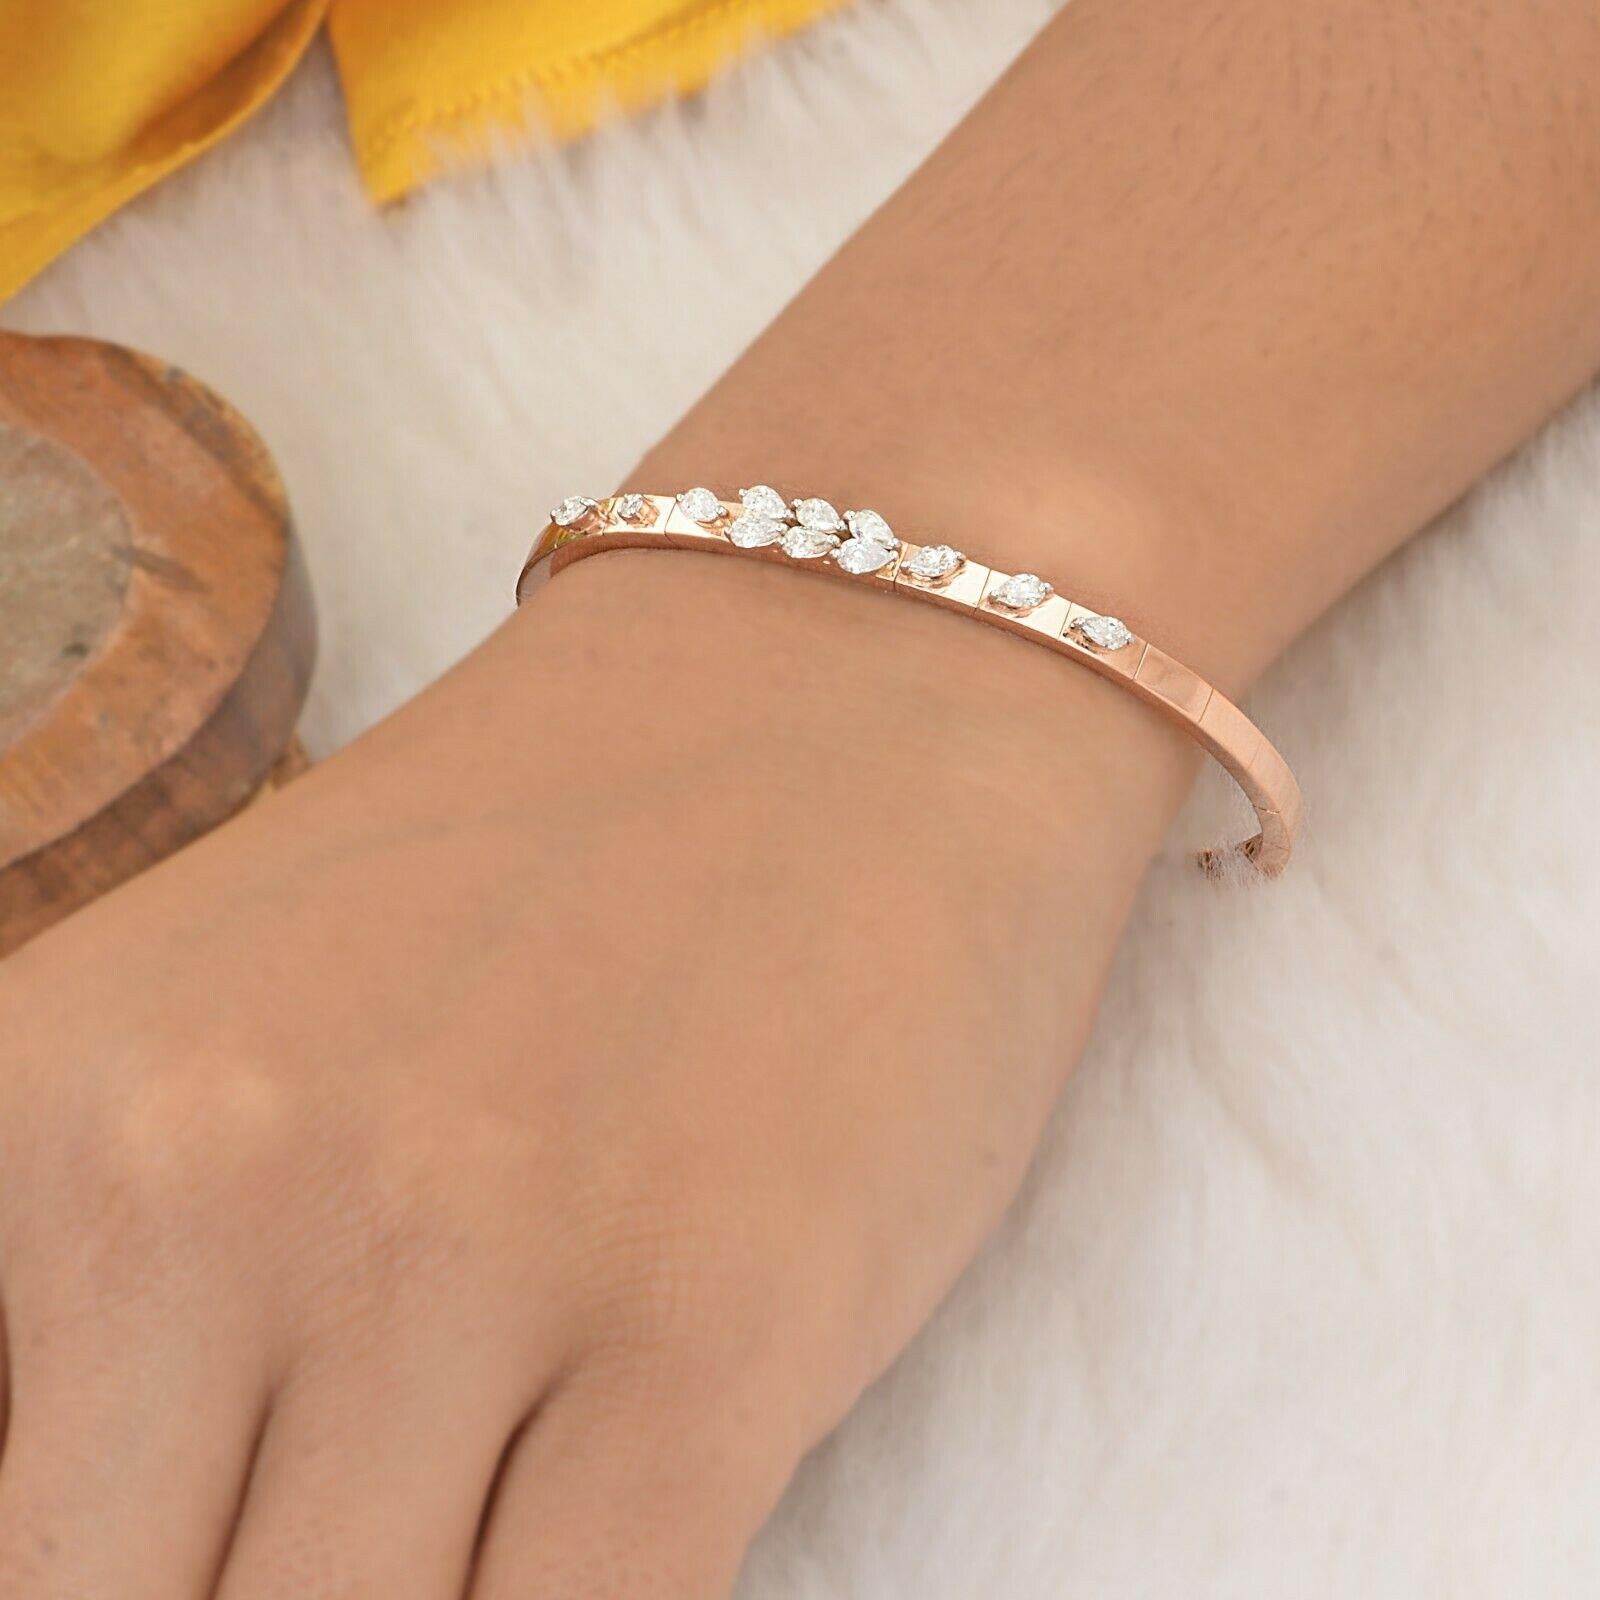 A bracelet handmade in 14K gold and hand set in 1.0 carats of sparkling diamonds. Wear it alone or stack it with your favorite pieces.

FOLLOW MEGHNA JEWELS storefront to view the latest collection & exclusive pieces. Meghna Jewels is proudly rated